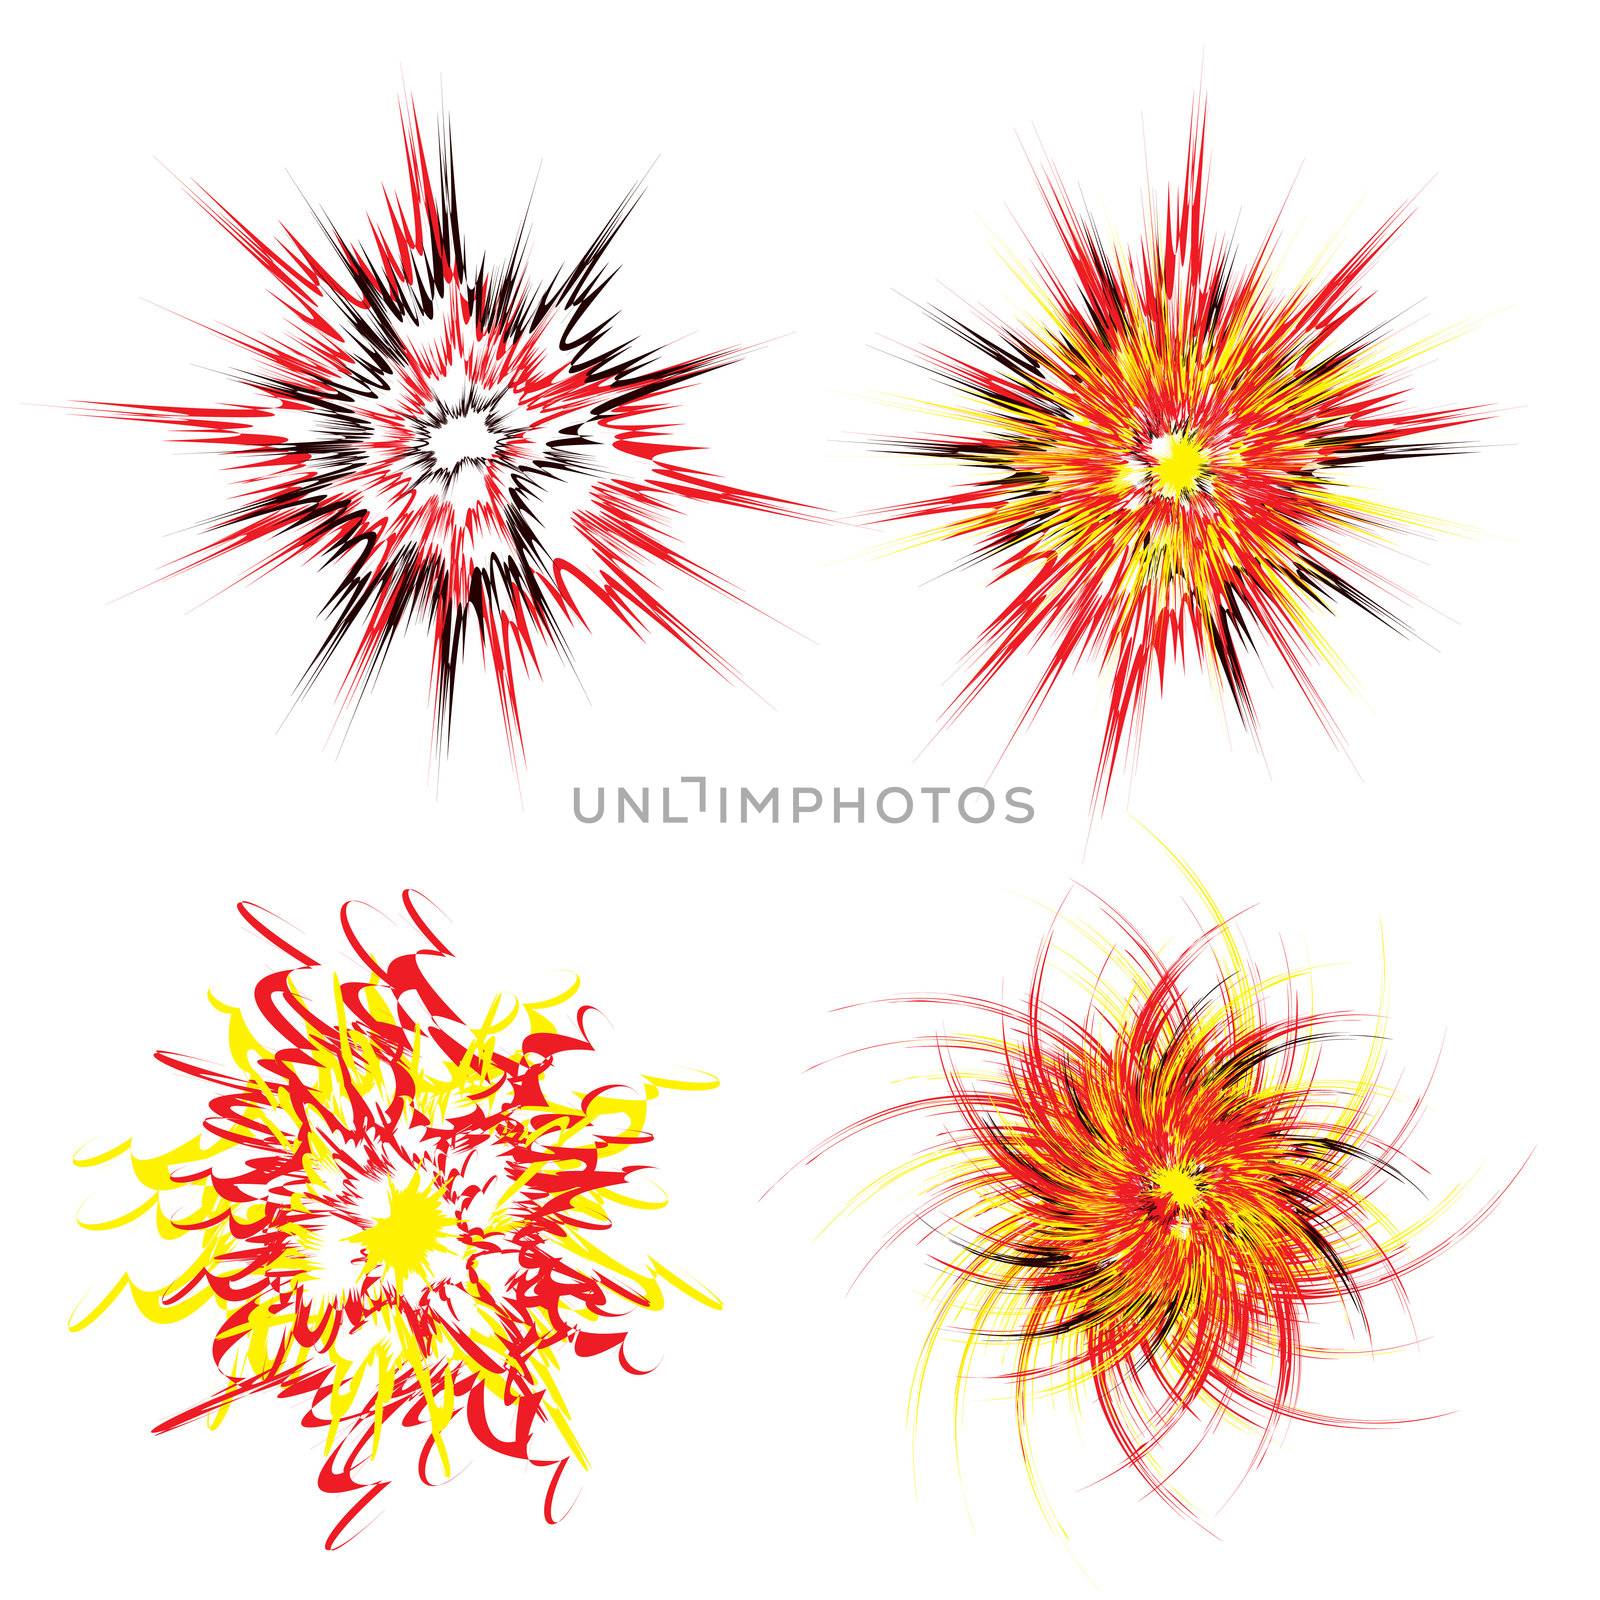 Four brightly coloured star explosions in red yellow and black